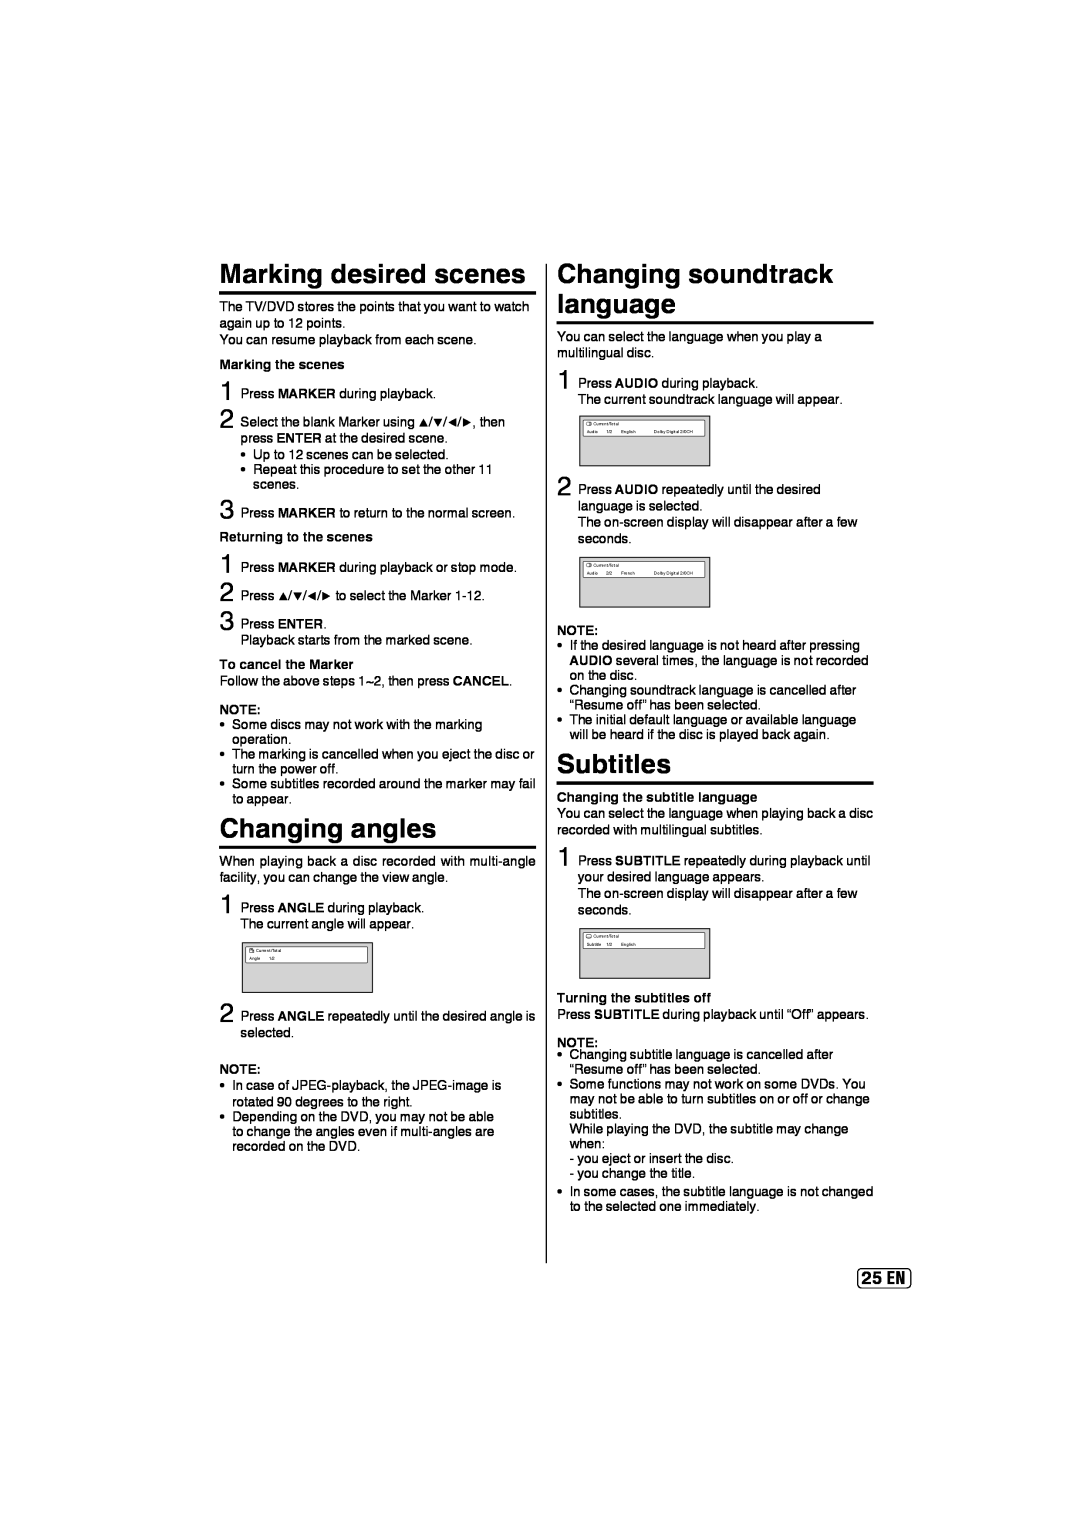 Sansui SLEDVD197 owner manual Marking desired scenes, Changing angles, 25 EN, Marking the scenes, Returning to the scenes 